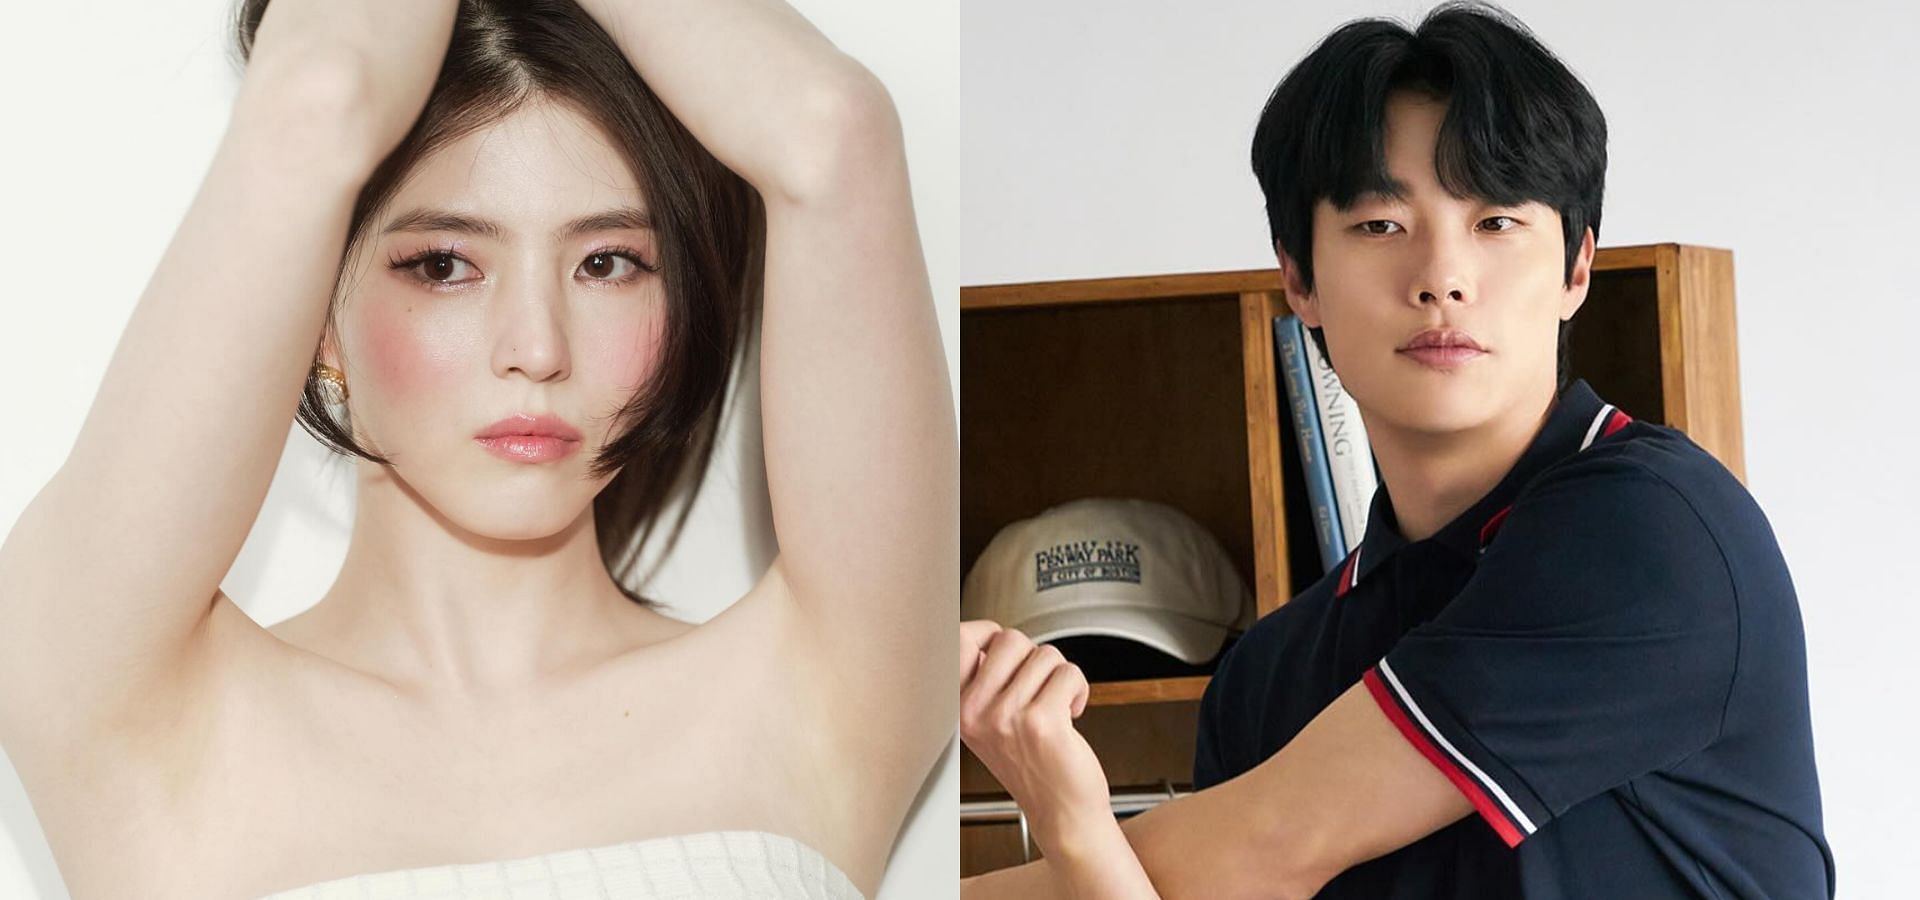  Han So-hee and Ryu Jun-yeol cancel casting for upcoming project named Deception (Images Via Instagram/@xeesoxee, @cjes.tagram) 